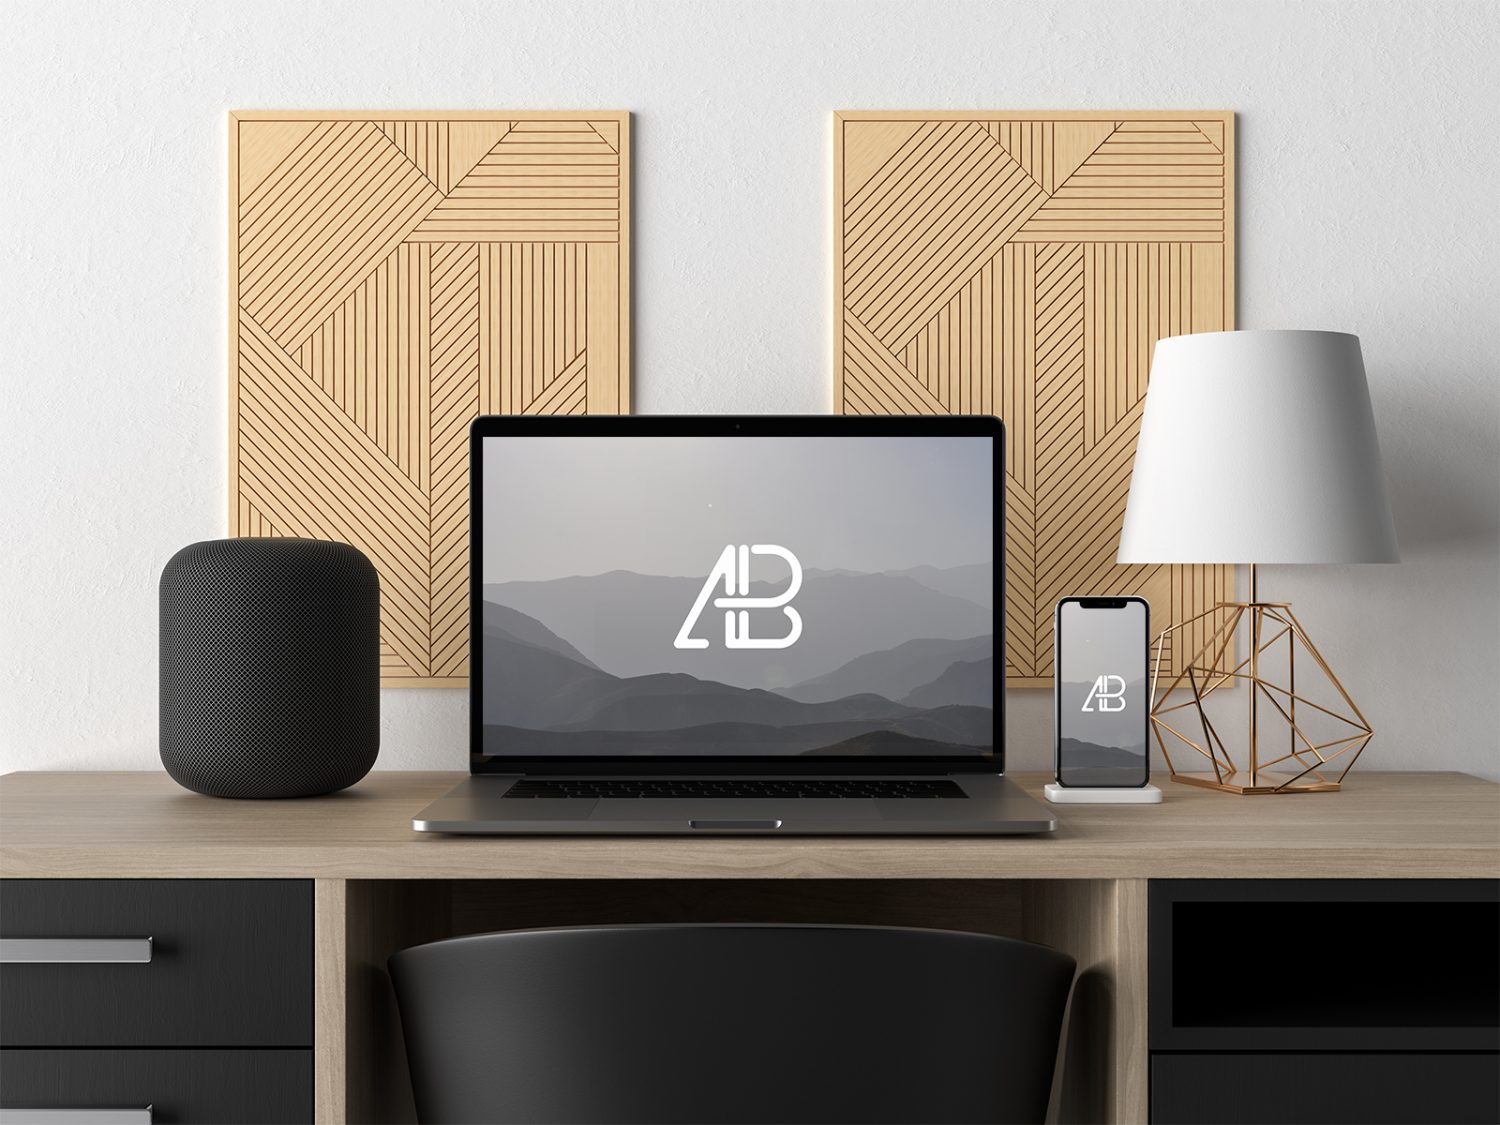 Macbook And iPhone On Desk Mockup